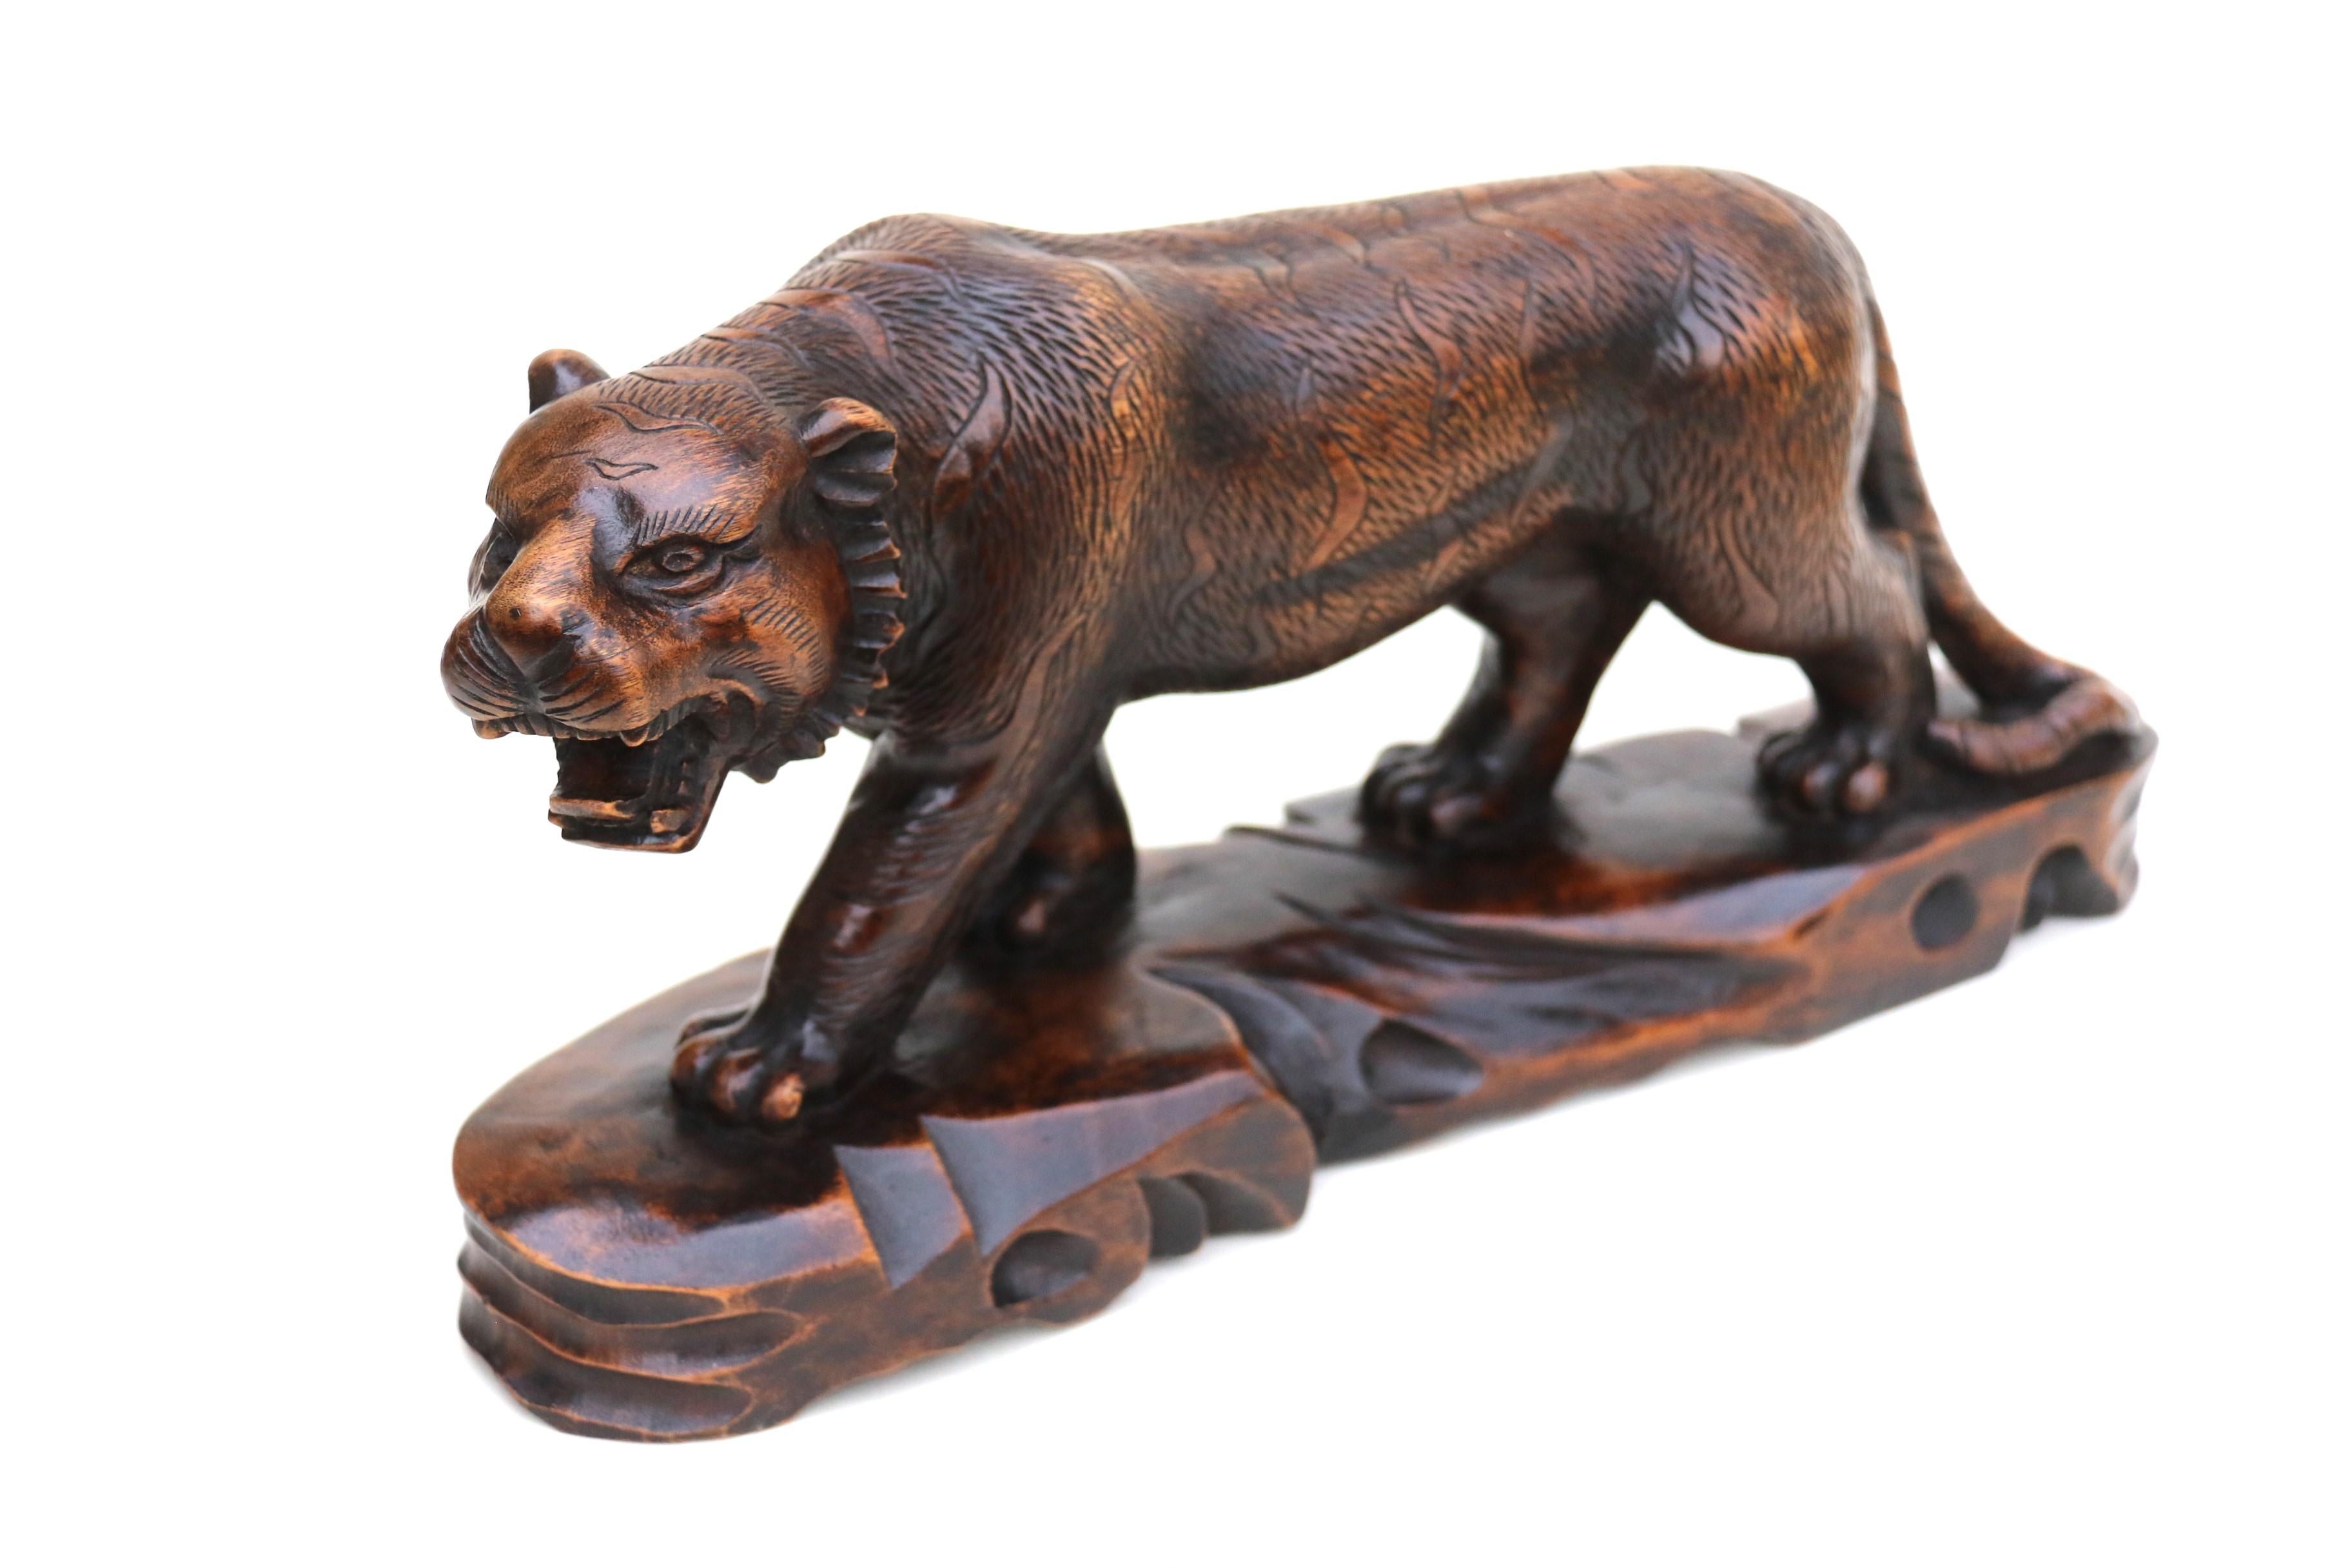 This most pleasing hand carved hardwood Japanese Meiji period okimono depicts a muscular prowling tiger. Its body is slightly lowered in a stalking position with its mouth open showing a formidable array of teeth which in addition to its large paws